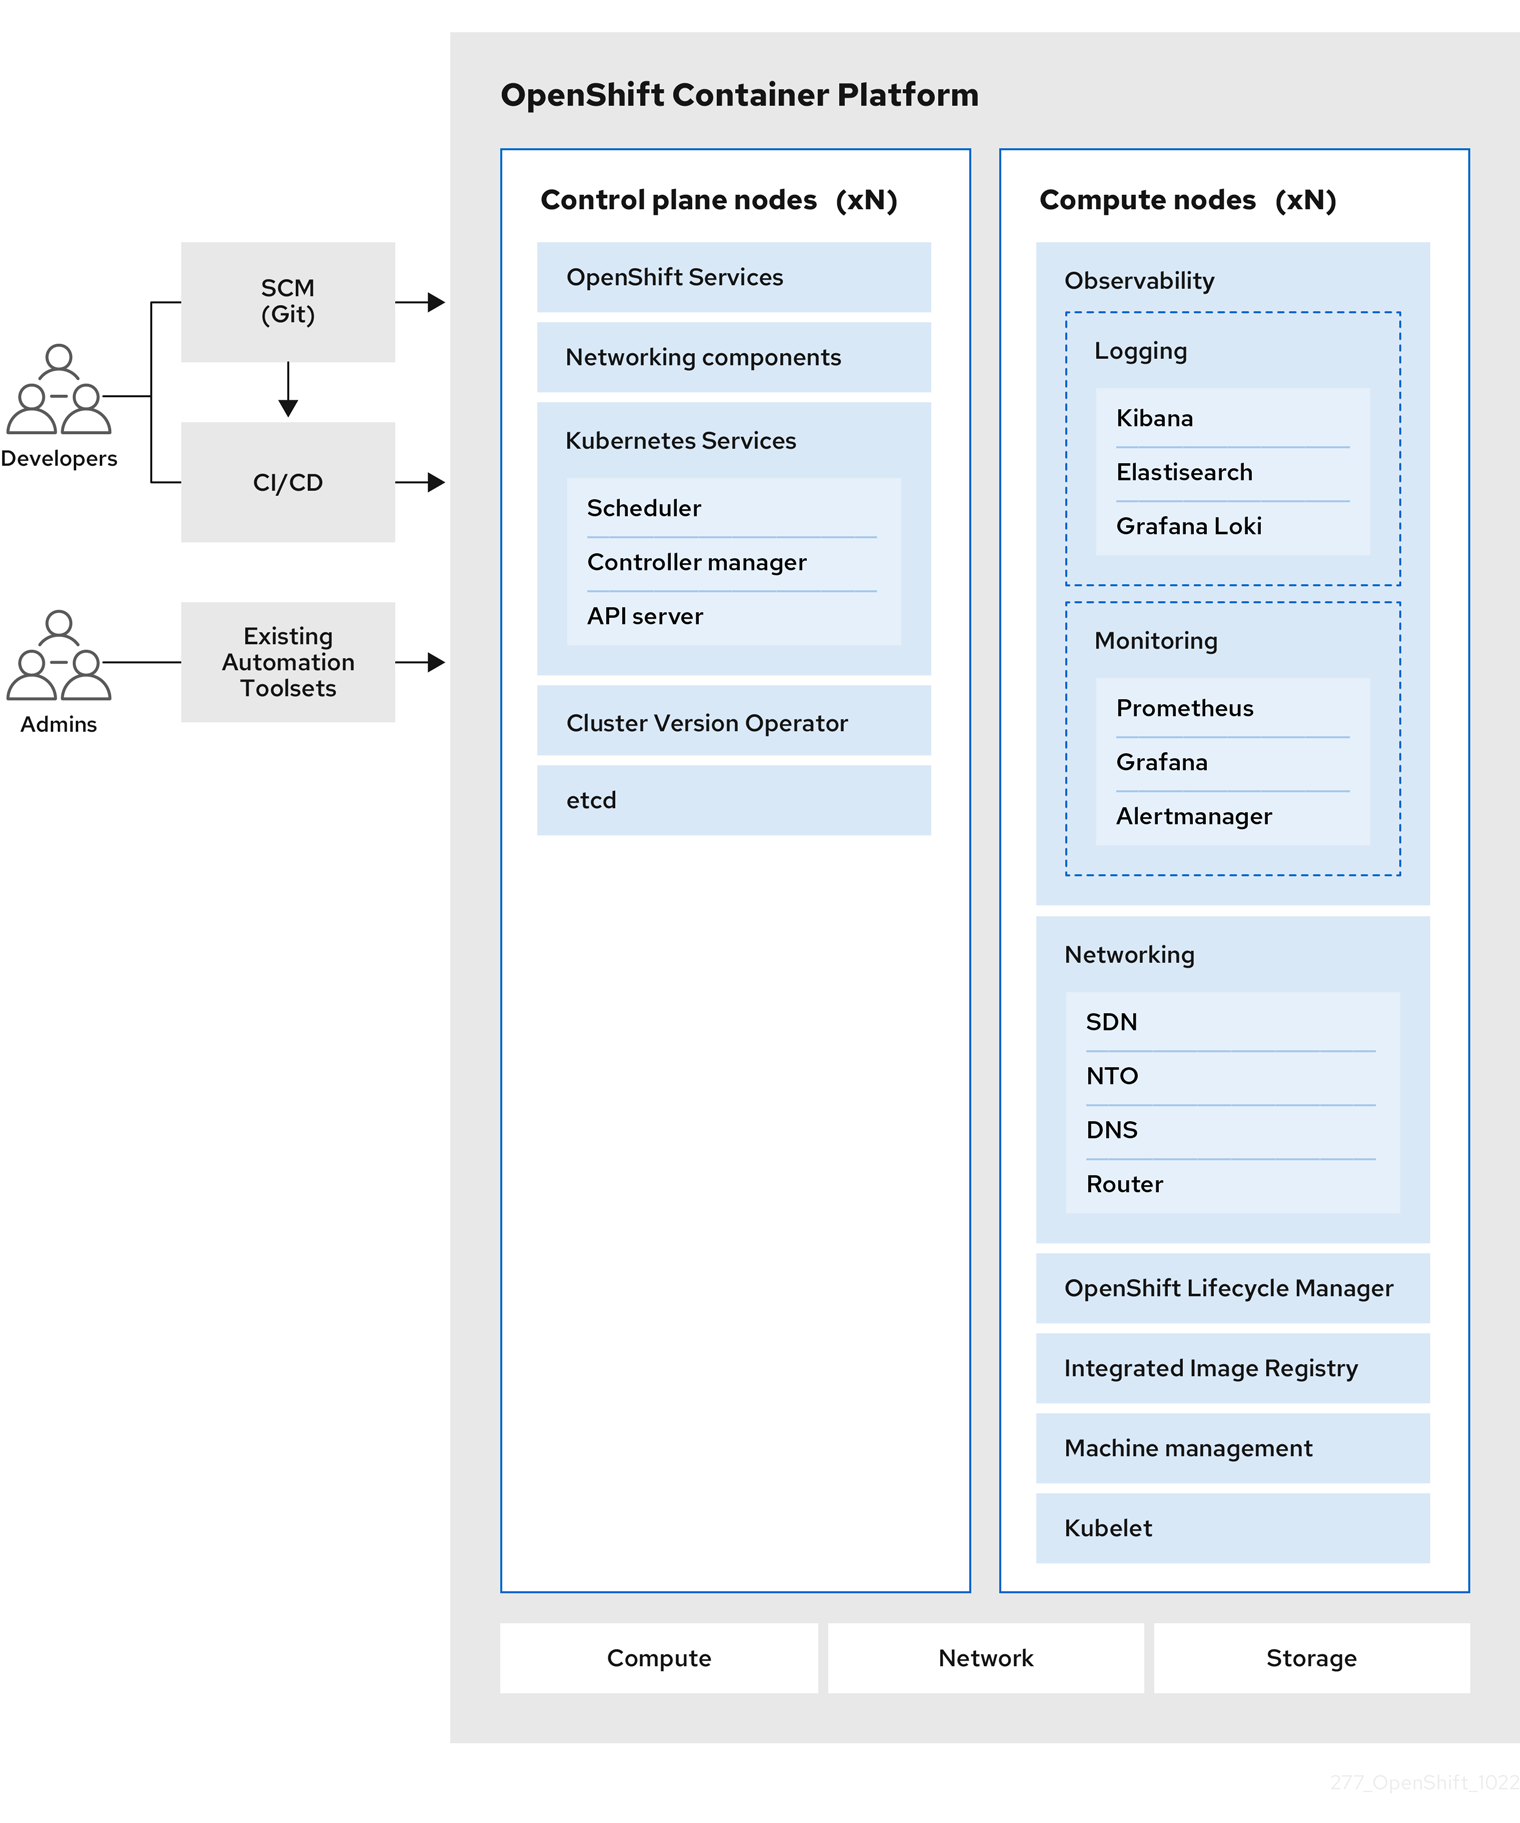 openshift-container-platform-architecture.png